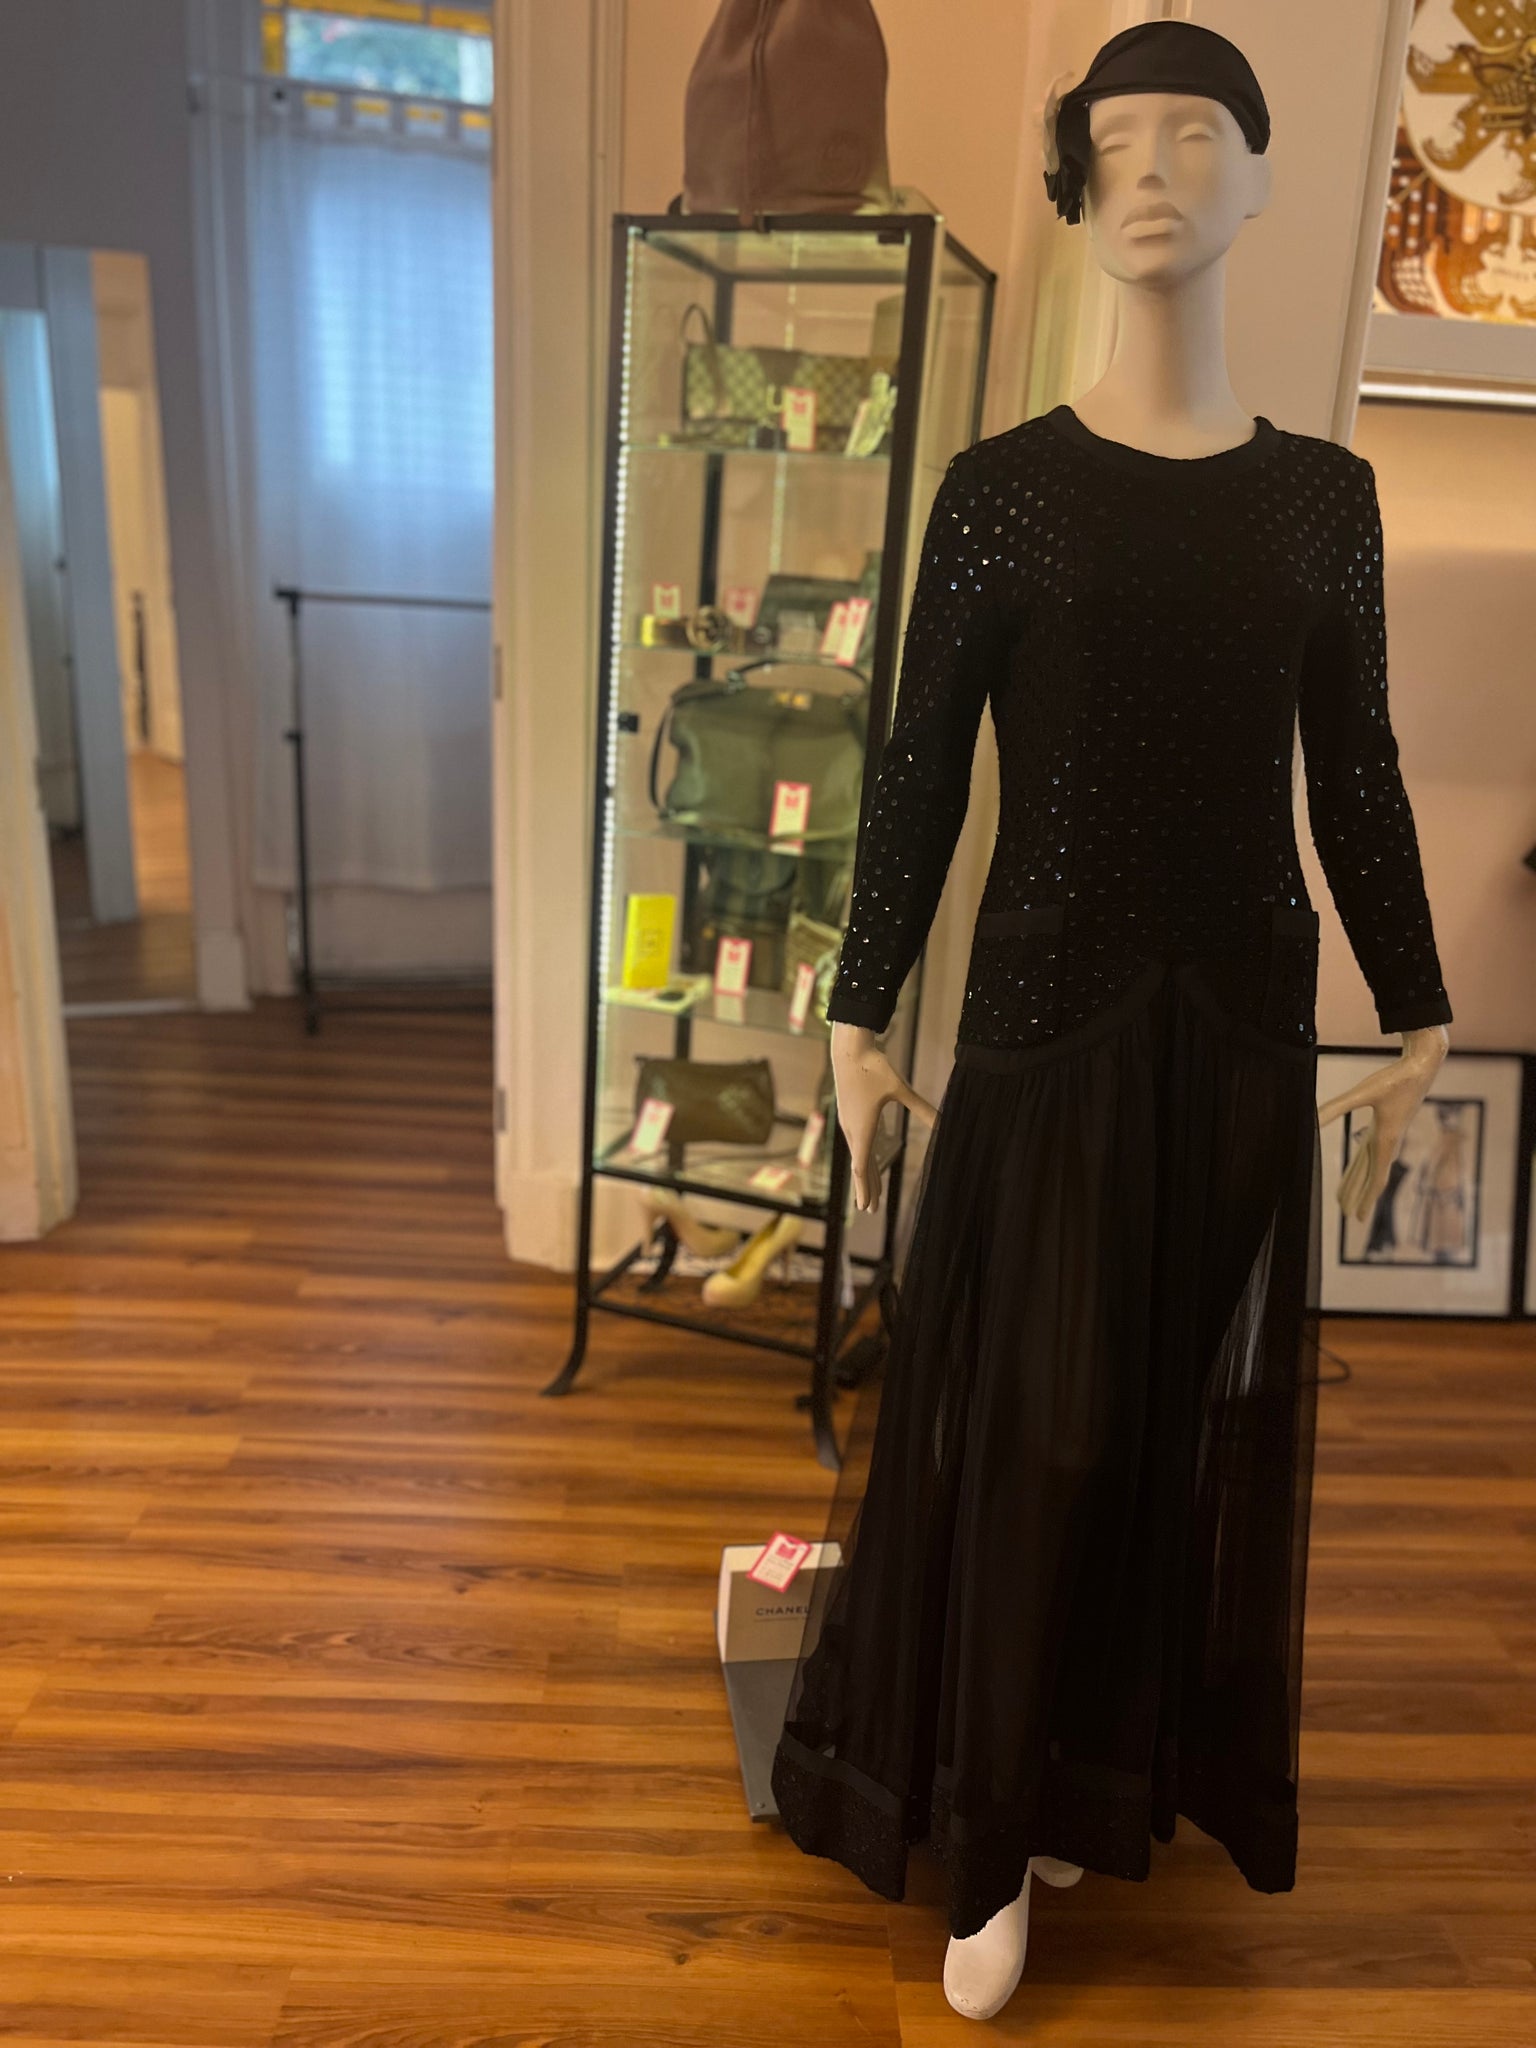 Chanel Vintage Gown w/Sequins and Tulle